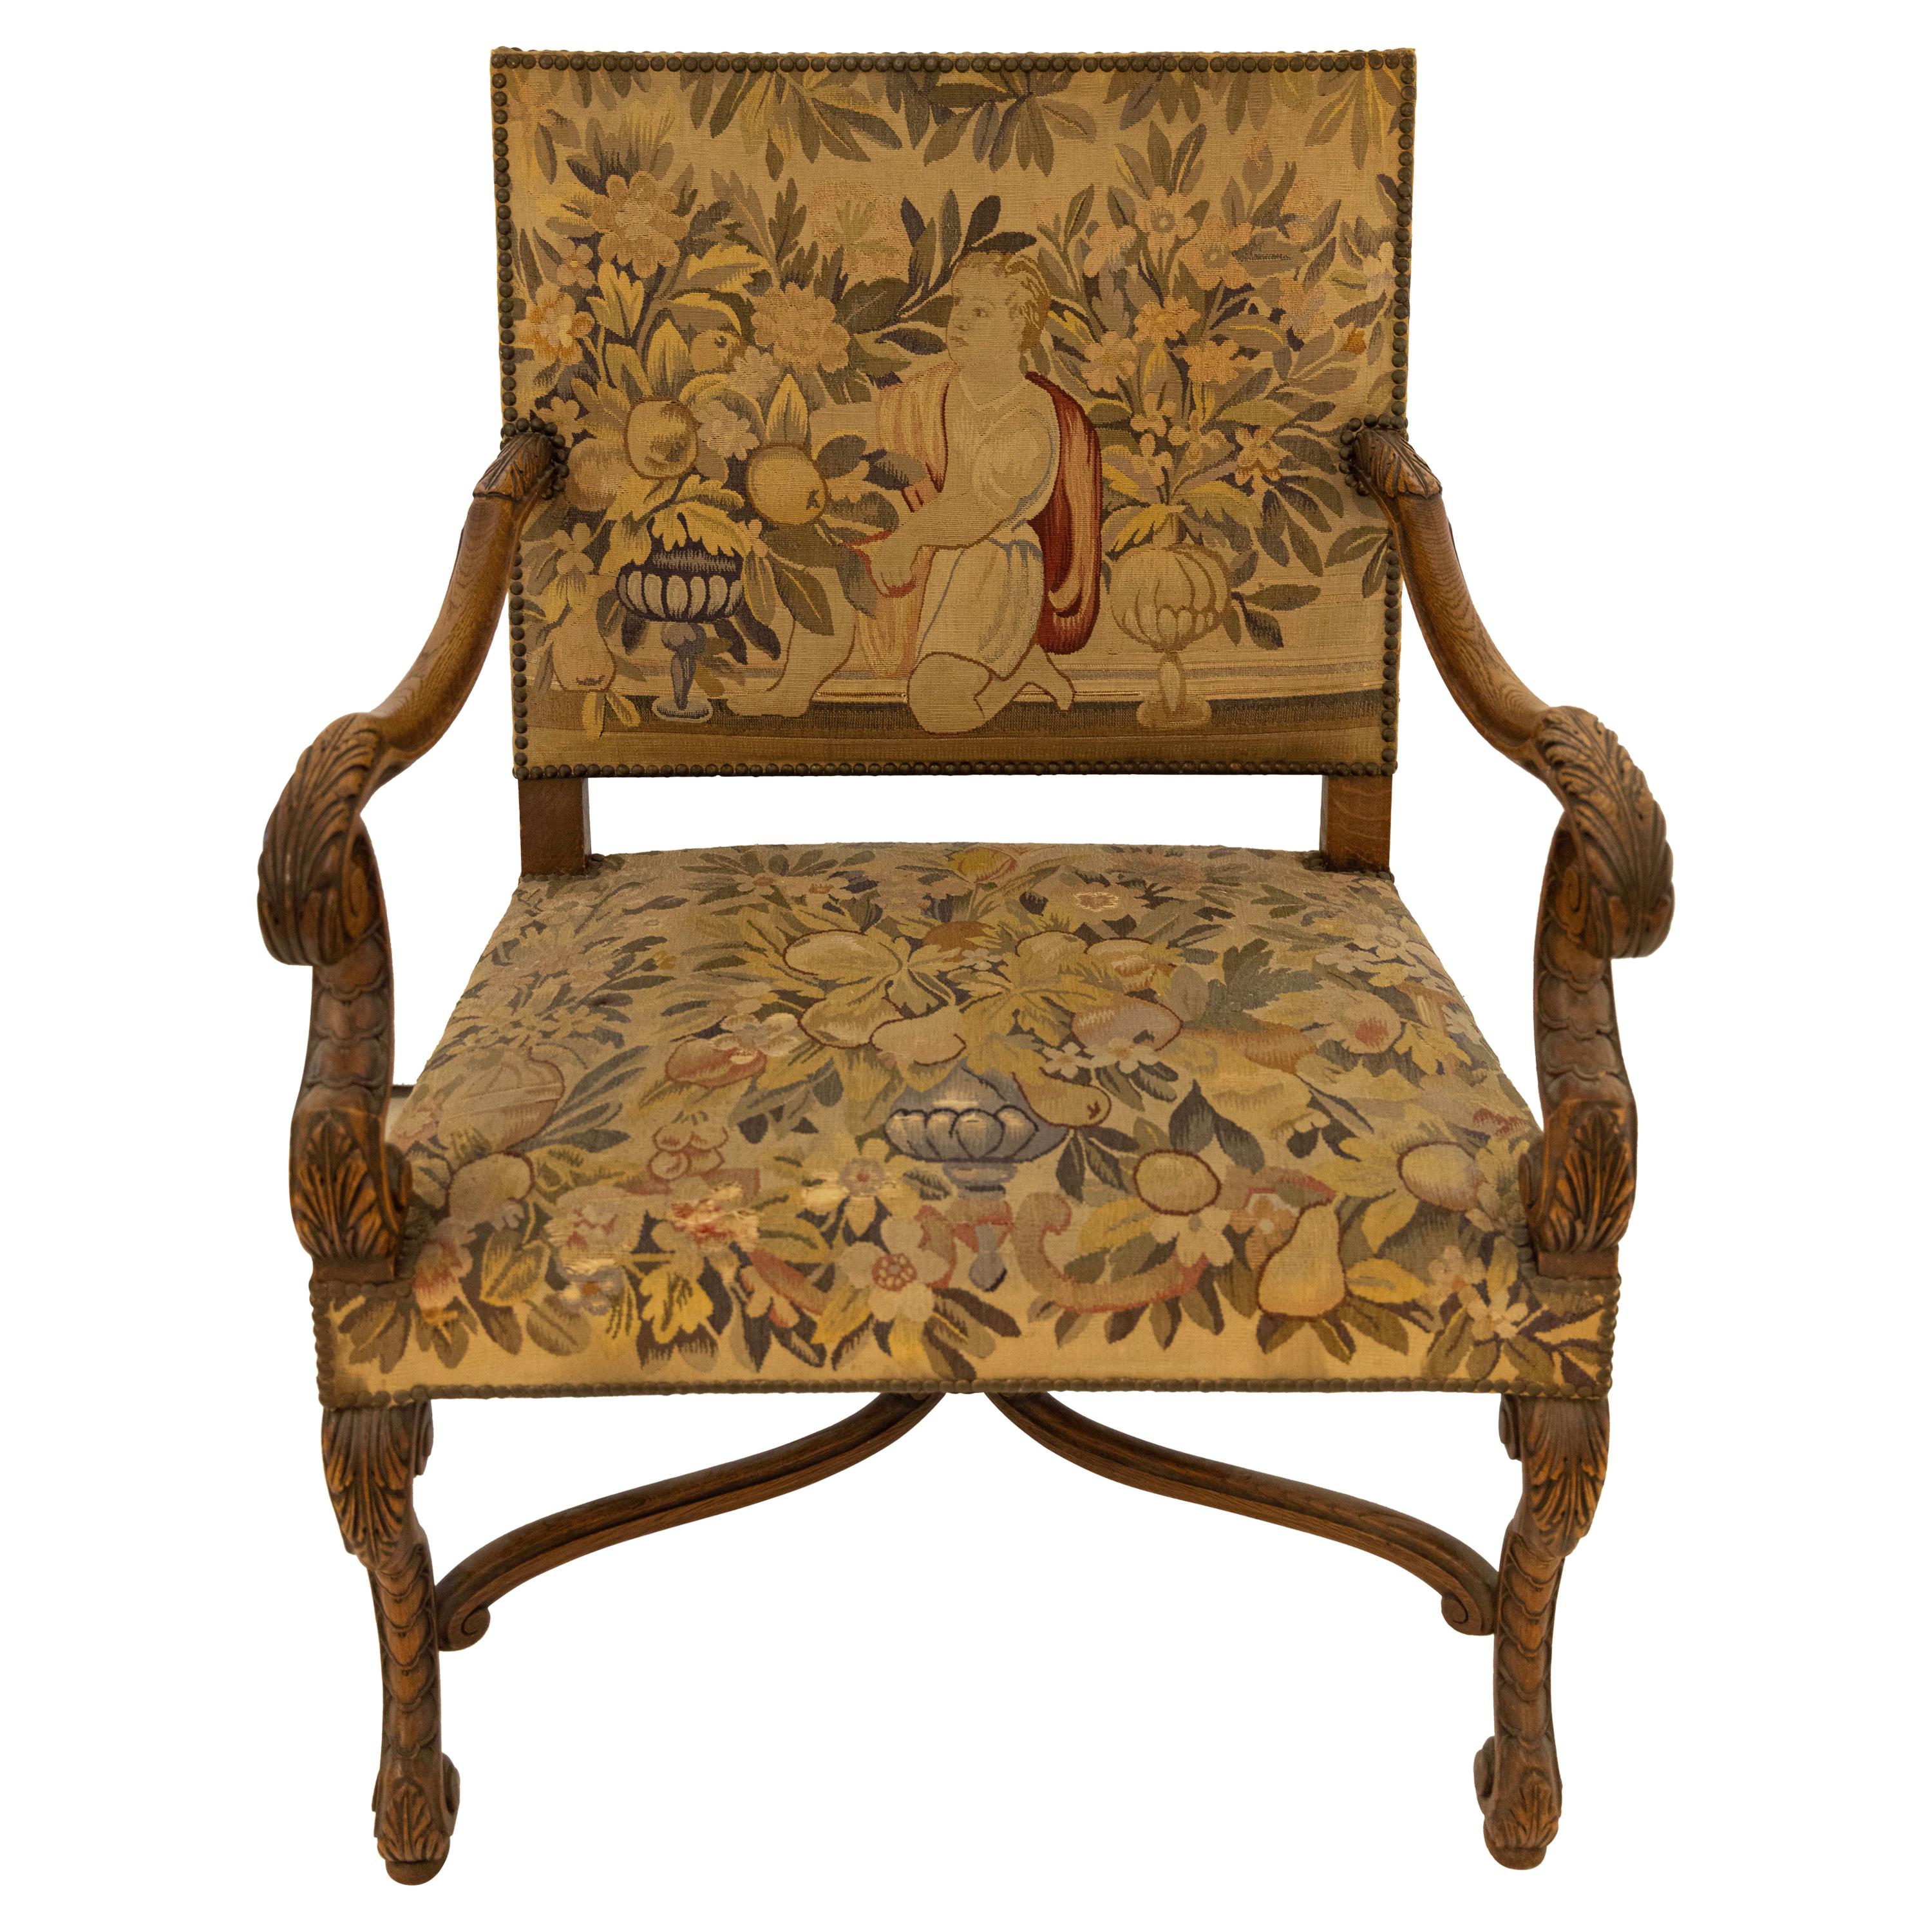 French Tapestry Chair Antique, c. 1700s For Sale